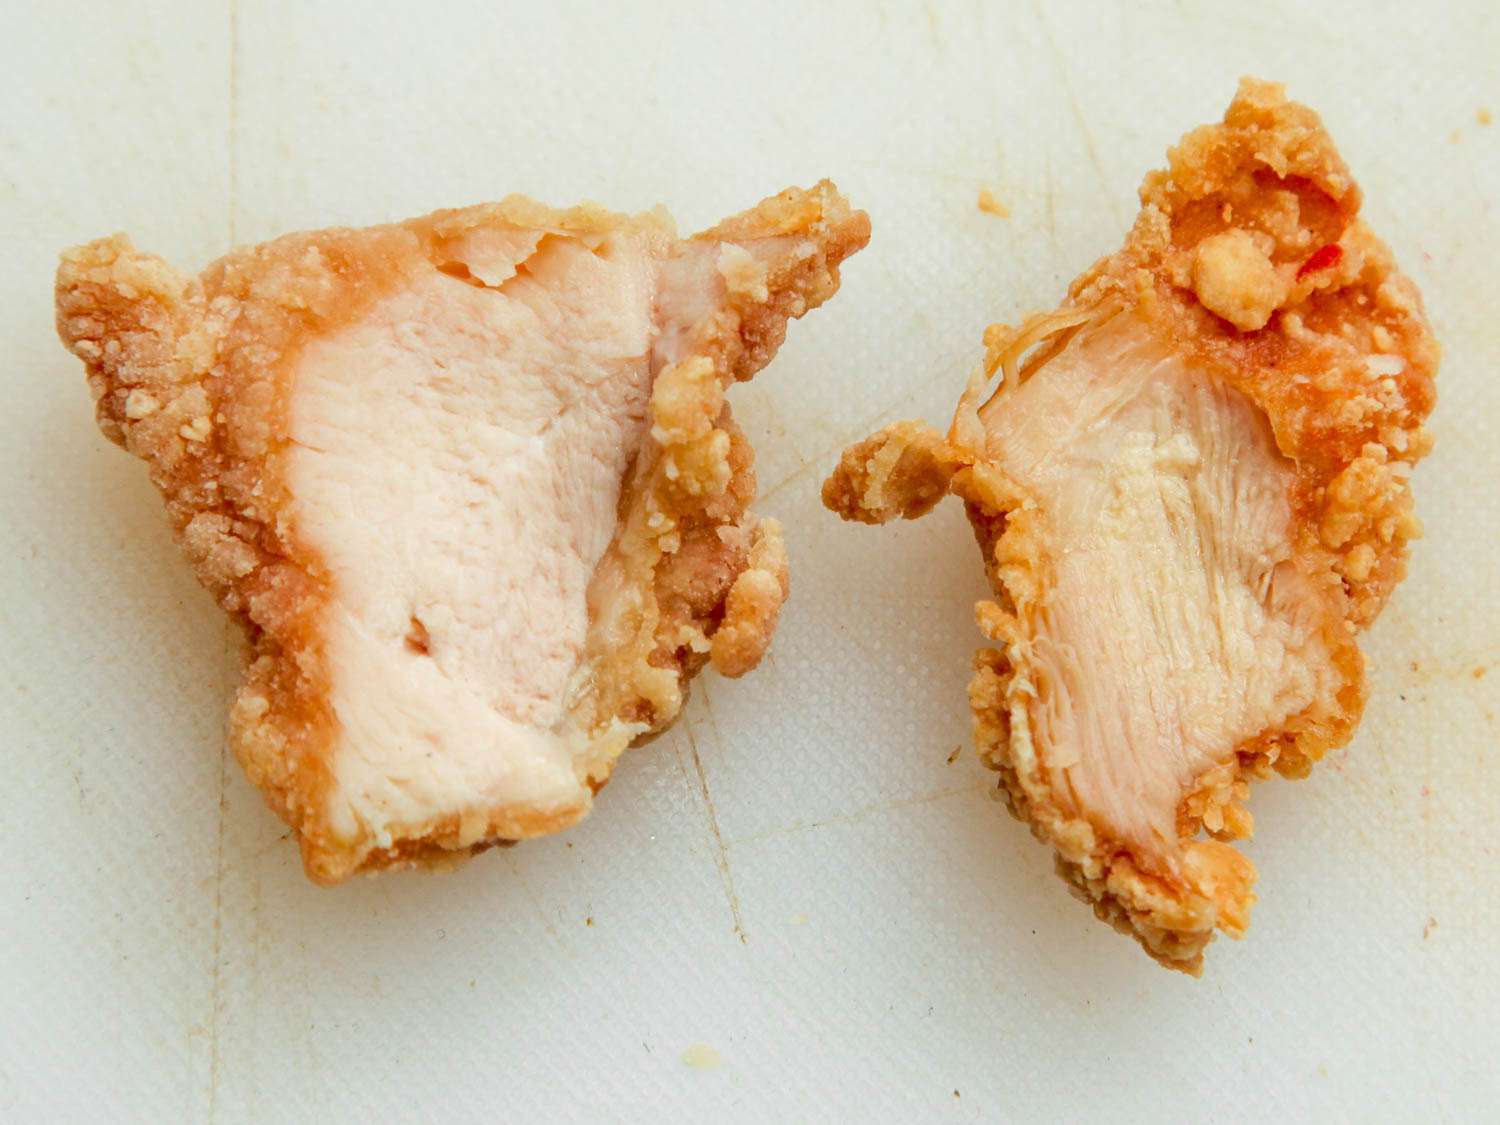 Fried chicken breast (left) and fried chicken thigh (right) side-by-side on white cutting board.